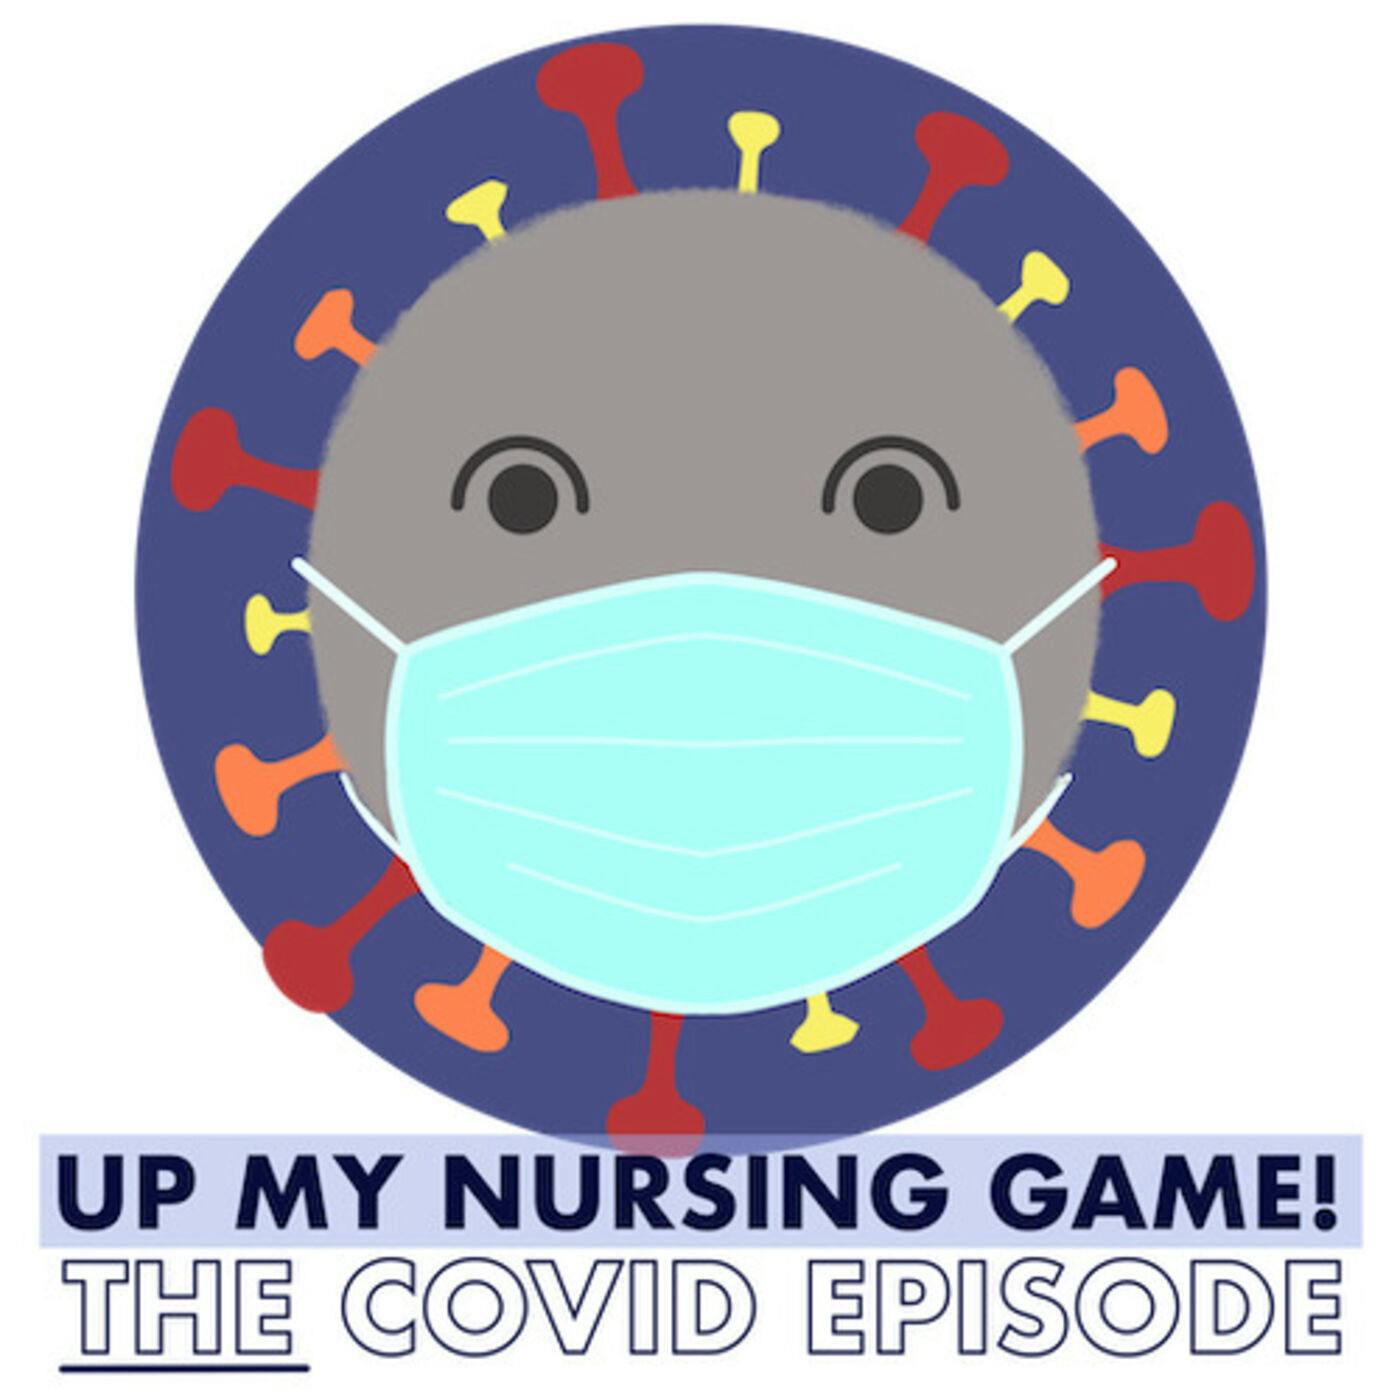 The COVID Episode: Where Are We Now?